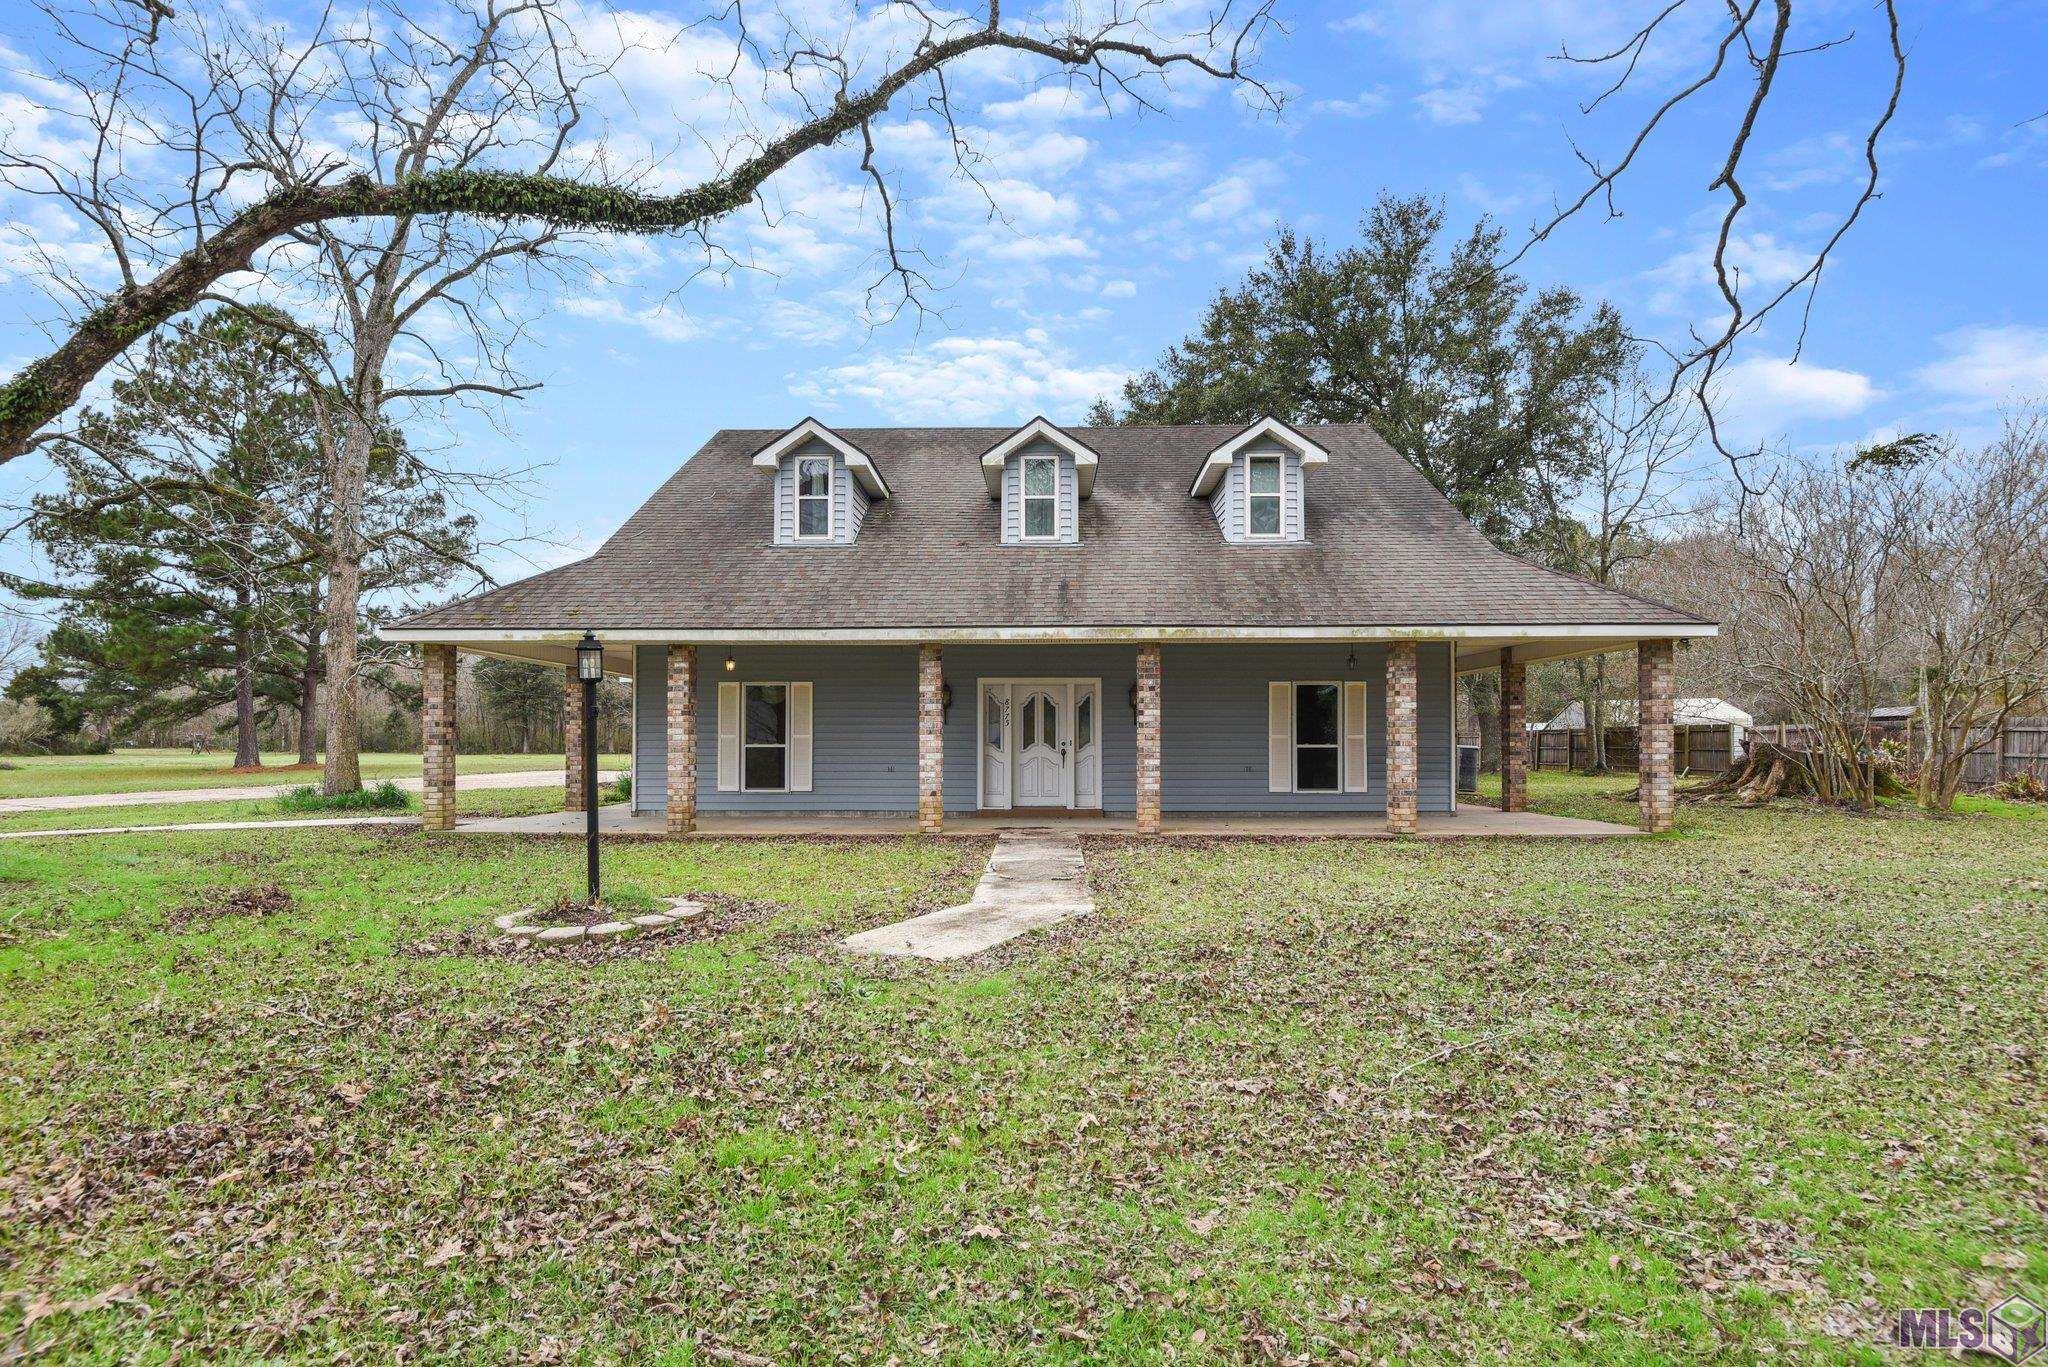 Recent Price Improvement! Spacious Acadian style home with a wraparound porch in the highly sought after City of Central, on just over an acre of land.  Home features soaring ceilings and Australian cypress flooring in the living room, lots of natural light, open floor plan, formal dining room, 3 large bedrooms, 2.5 baths. Built with foam and concrete walls, the average utility bill is around $120/month! The large, shaded yard has 5 mature pecan trees, a fig and persimmon tree, located in flood zone X! and DID NOT FLOOD in 2016! Call for your private showing today! Measurements not warranted by broker or agent.